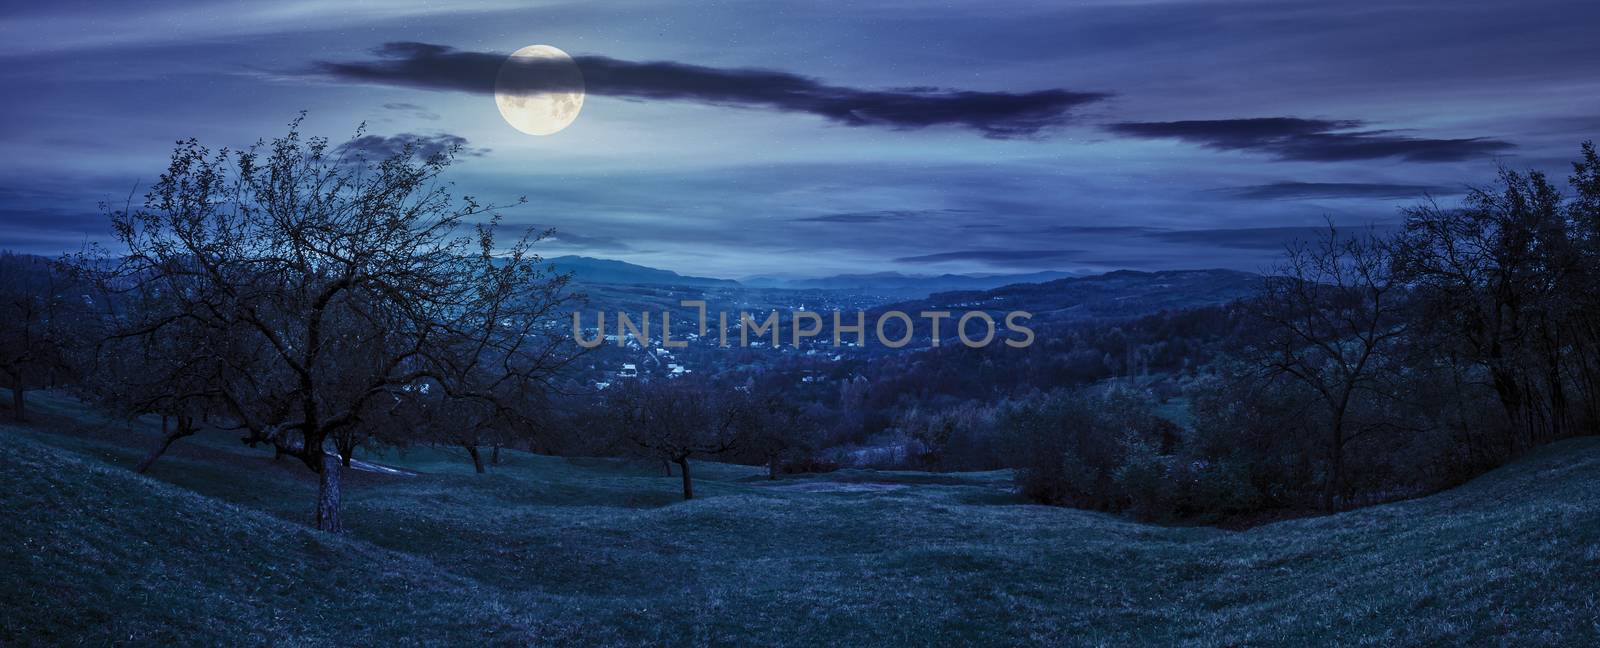 panorama of apple orchard on hillside at night by Pellinni